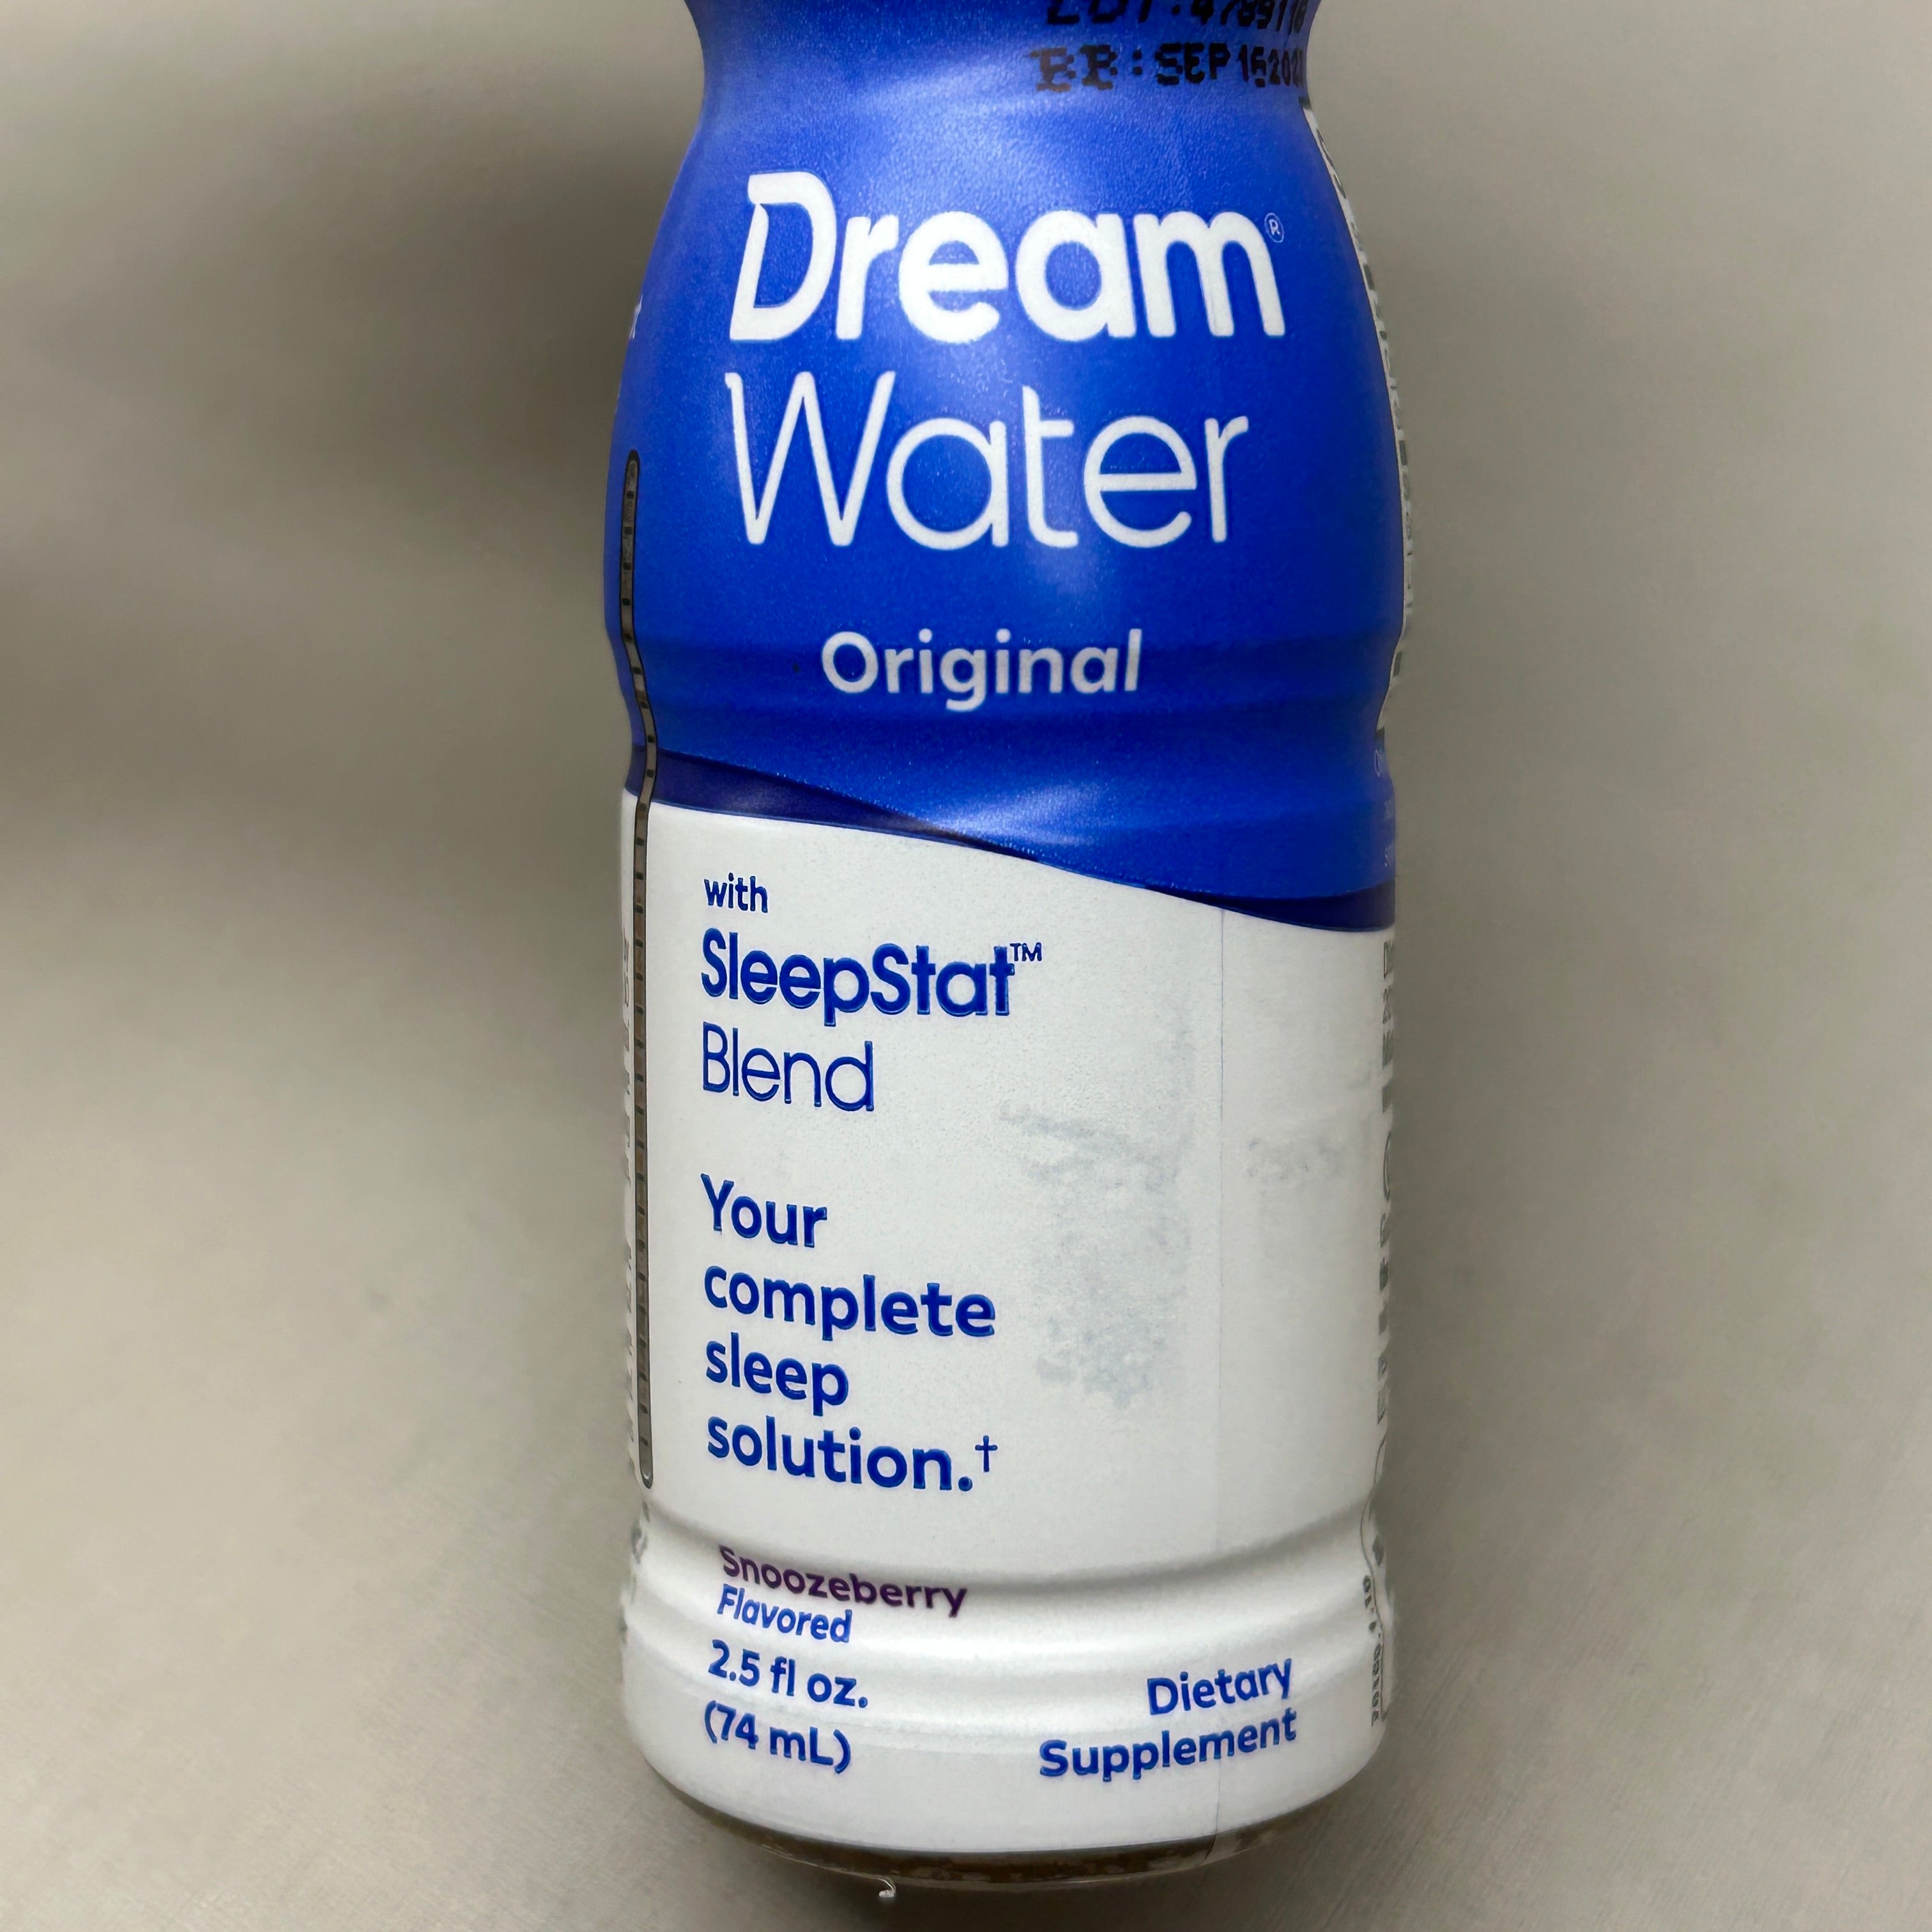 z@ DREAM WATER 12-PACK! Sleep and Relaxation Shot Snoozeberry 2.5 fl oz BB 09/23 (New) J